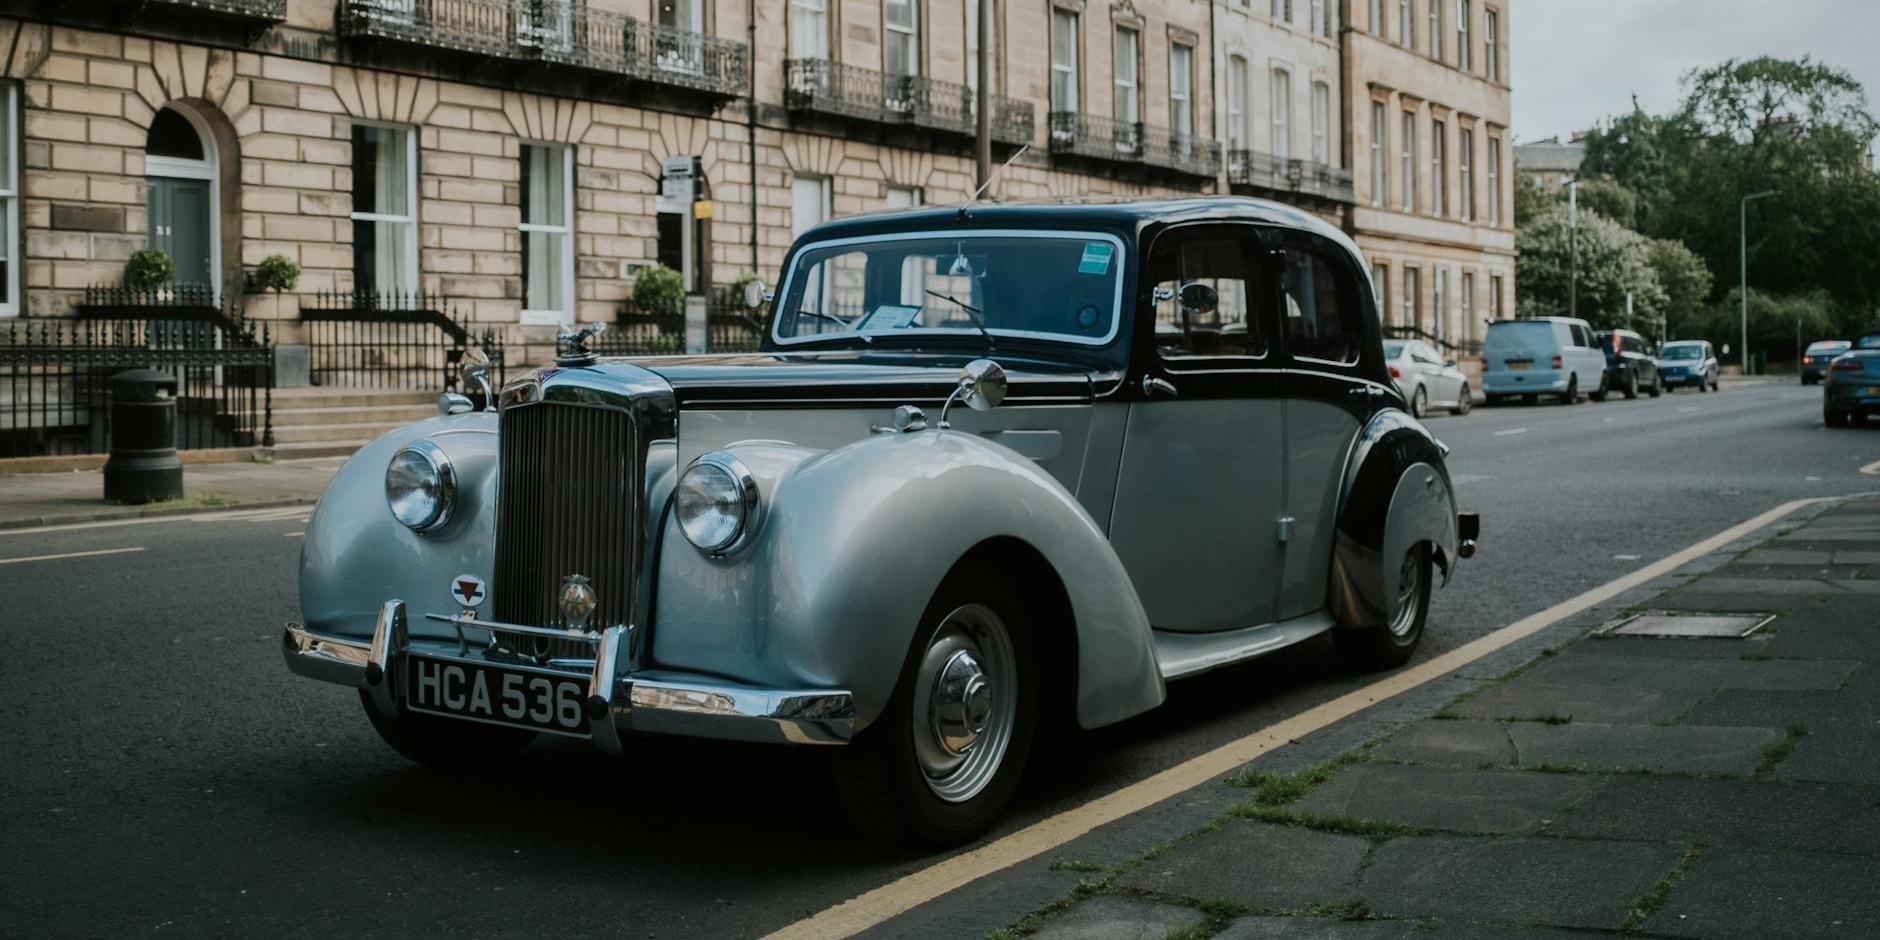 What Sets the Rolls-Royce Phantom Apart for Luxury Events and Weddings?